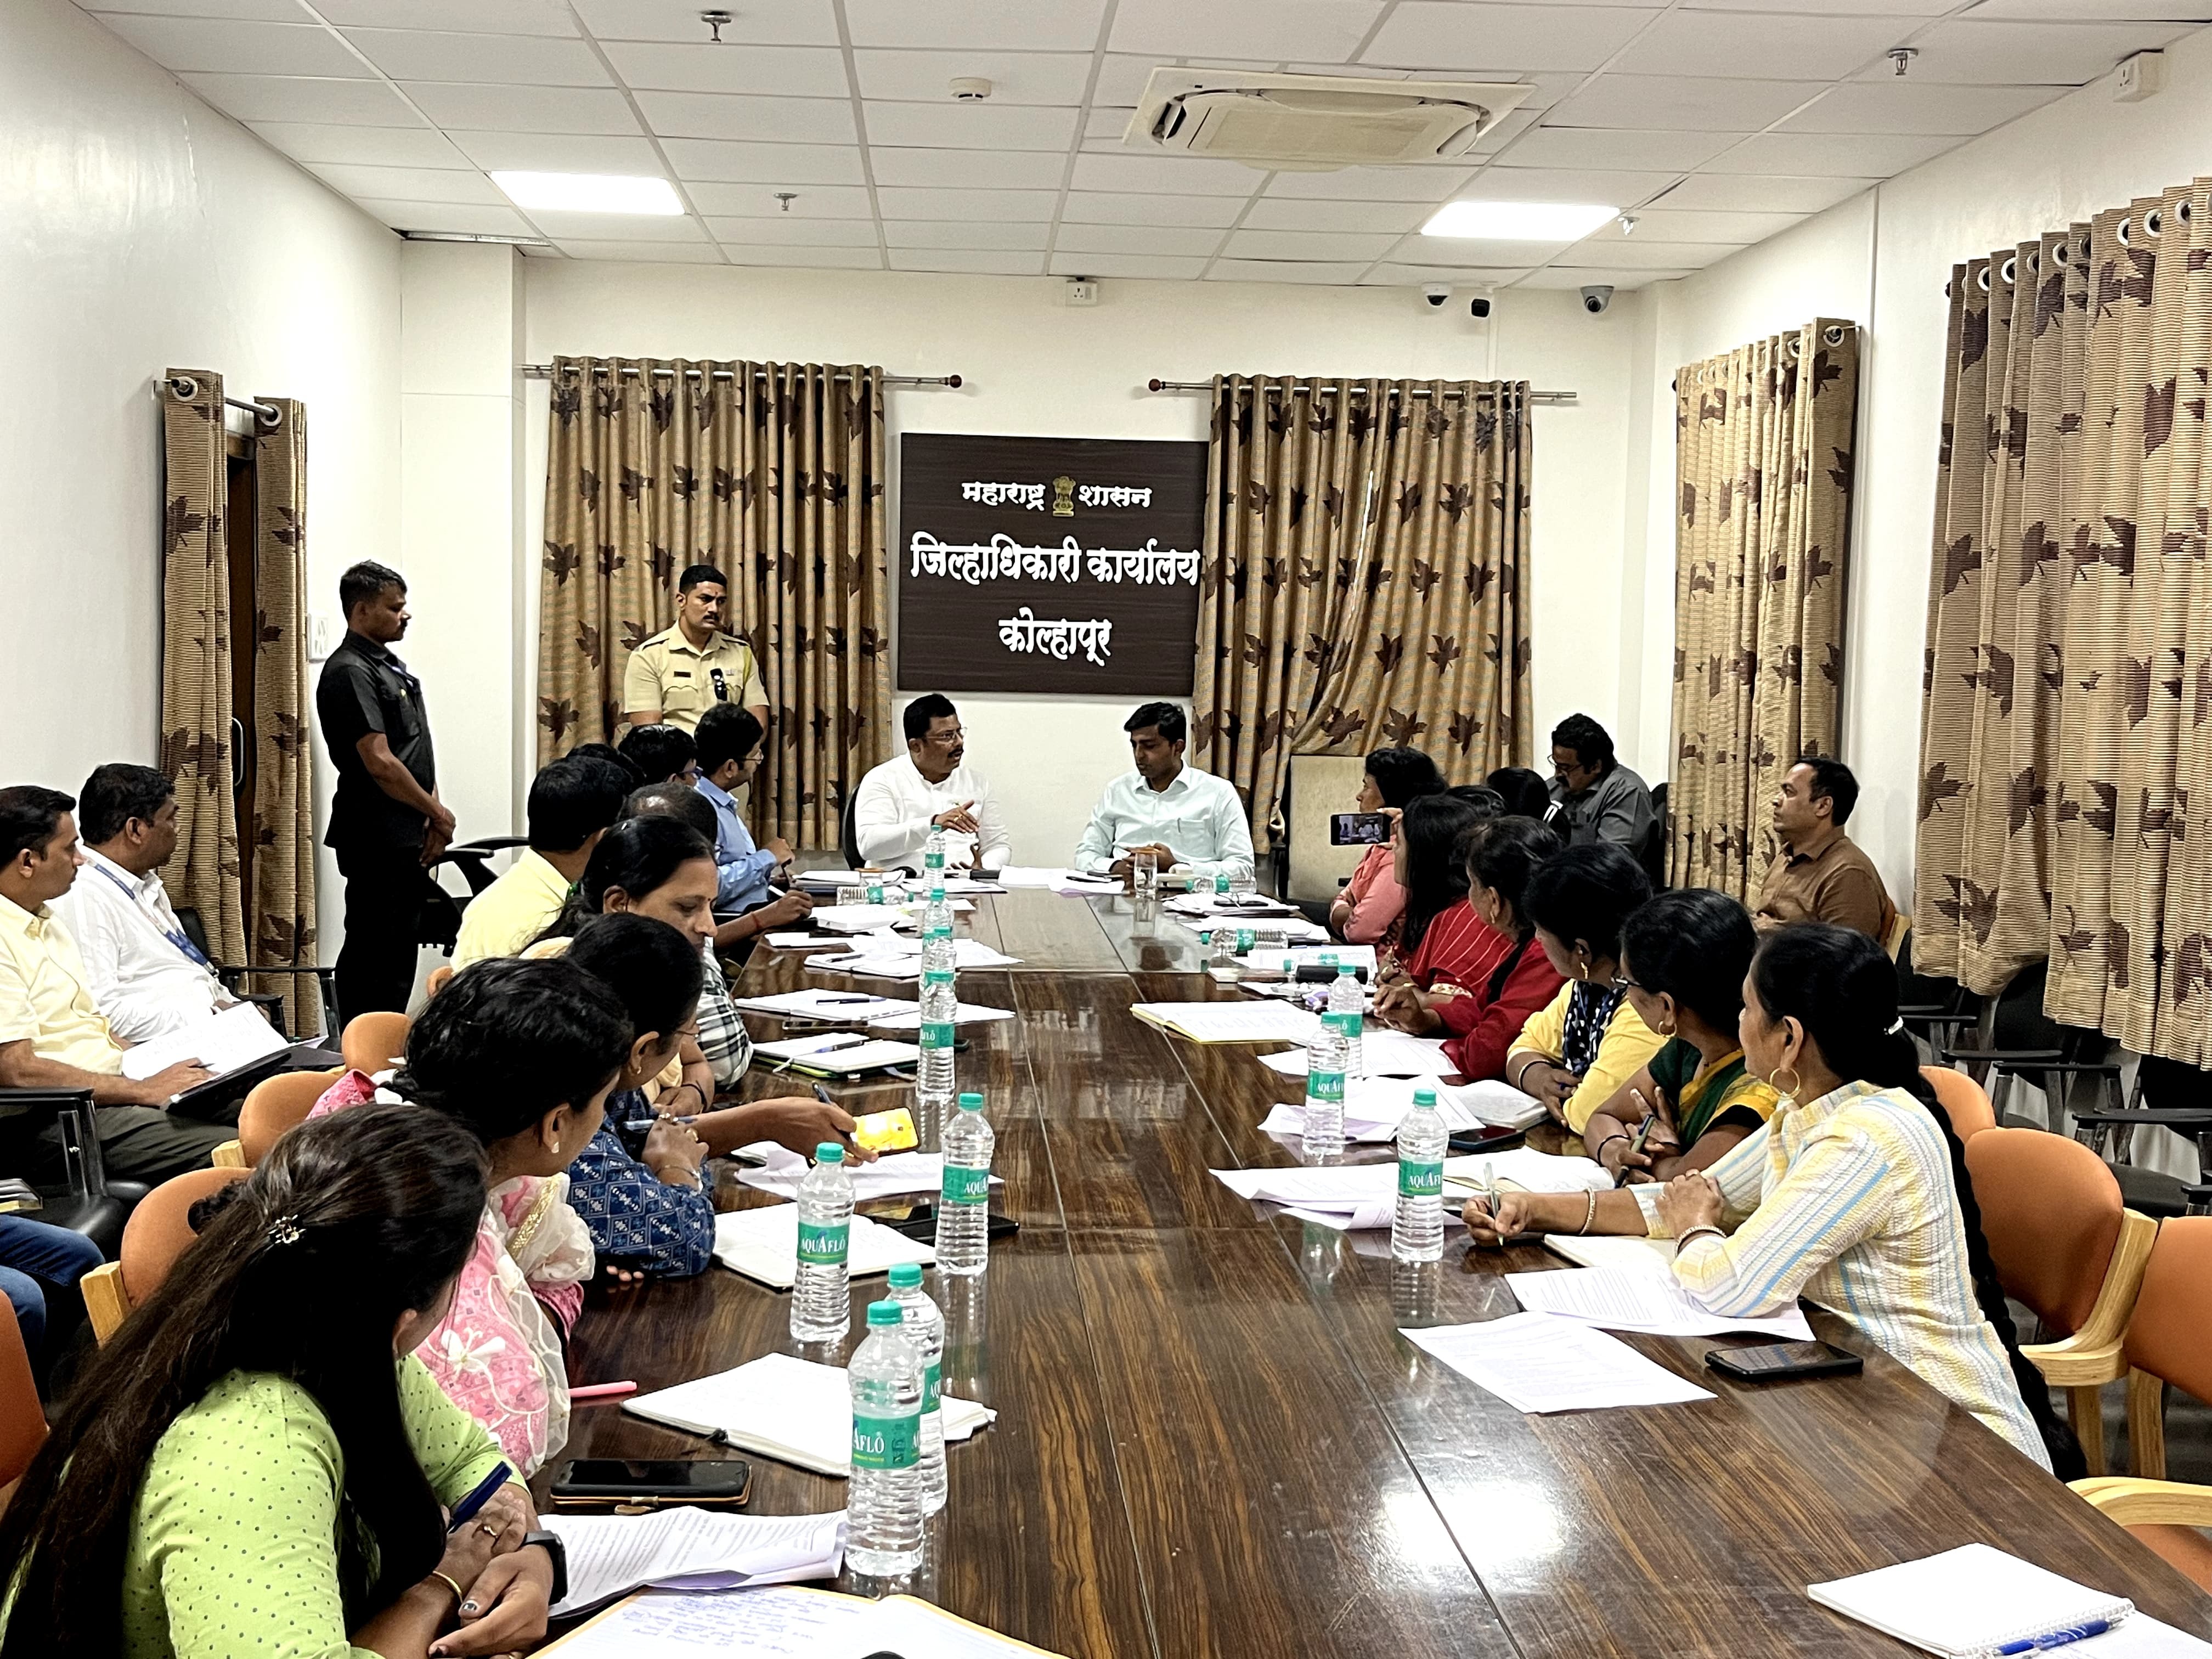 Meeting at the Collectors office for the implementation of the scheme